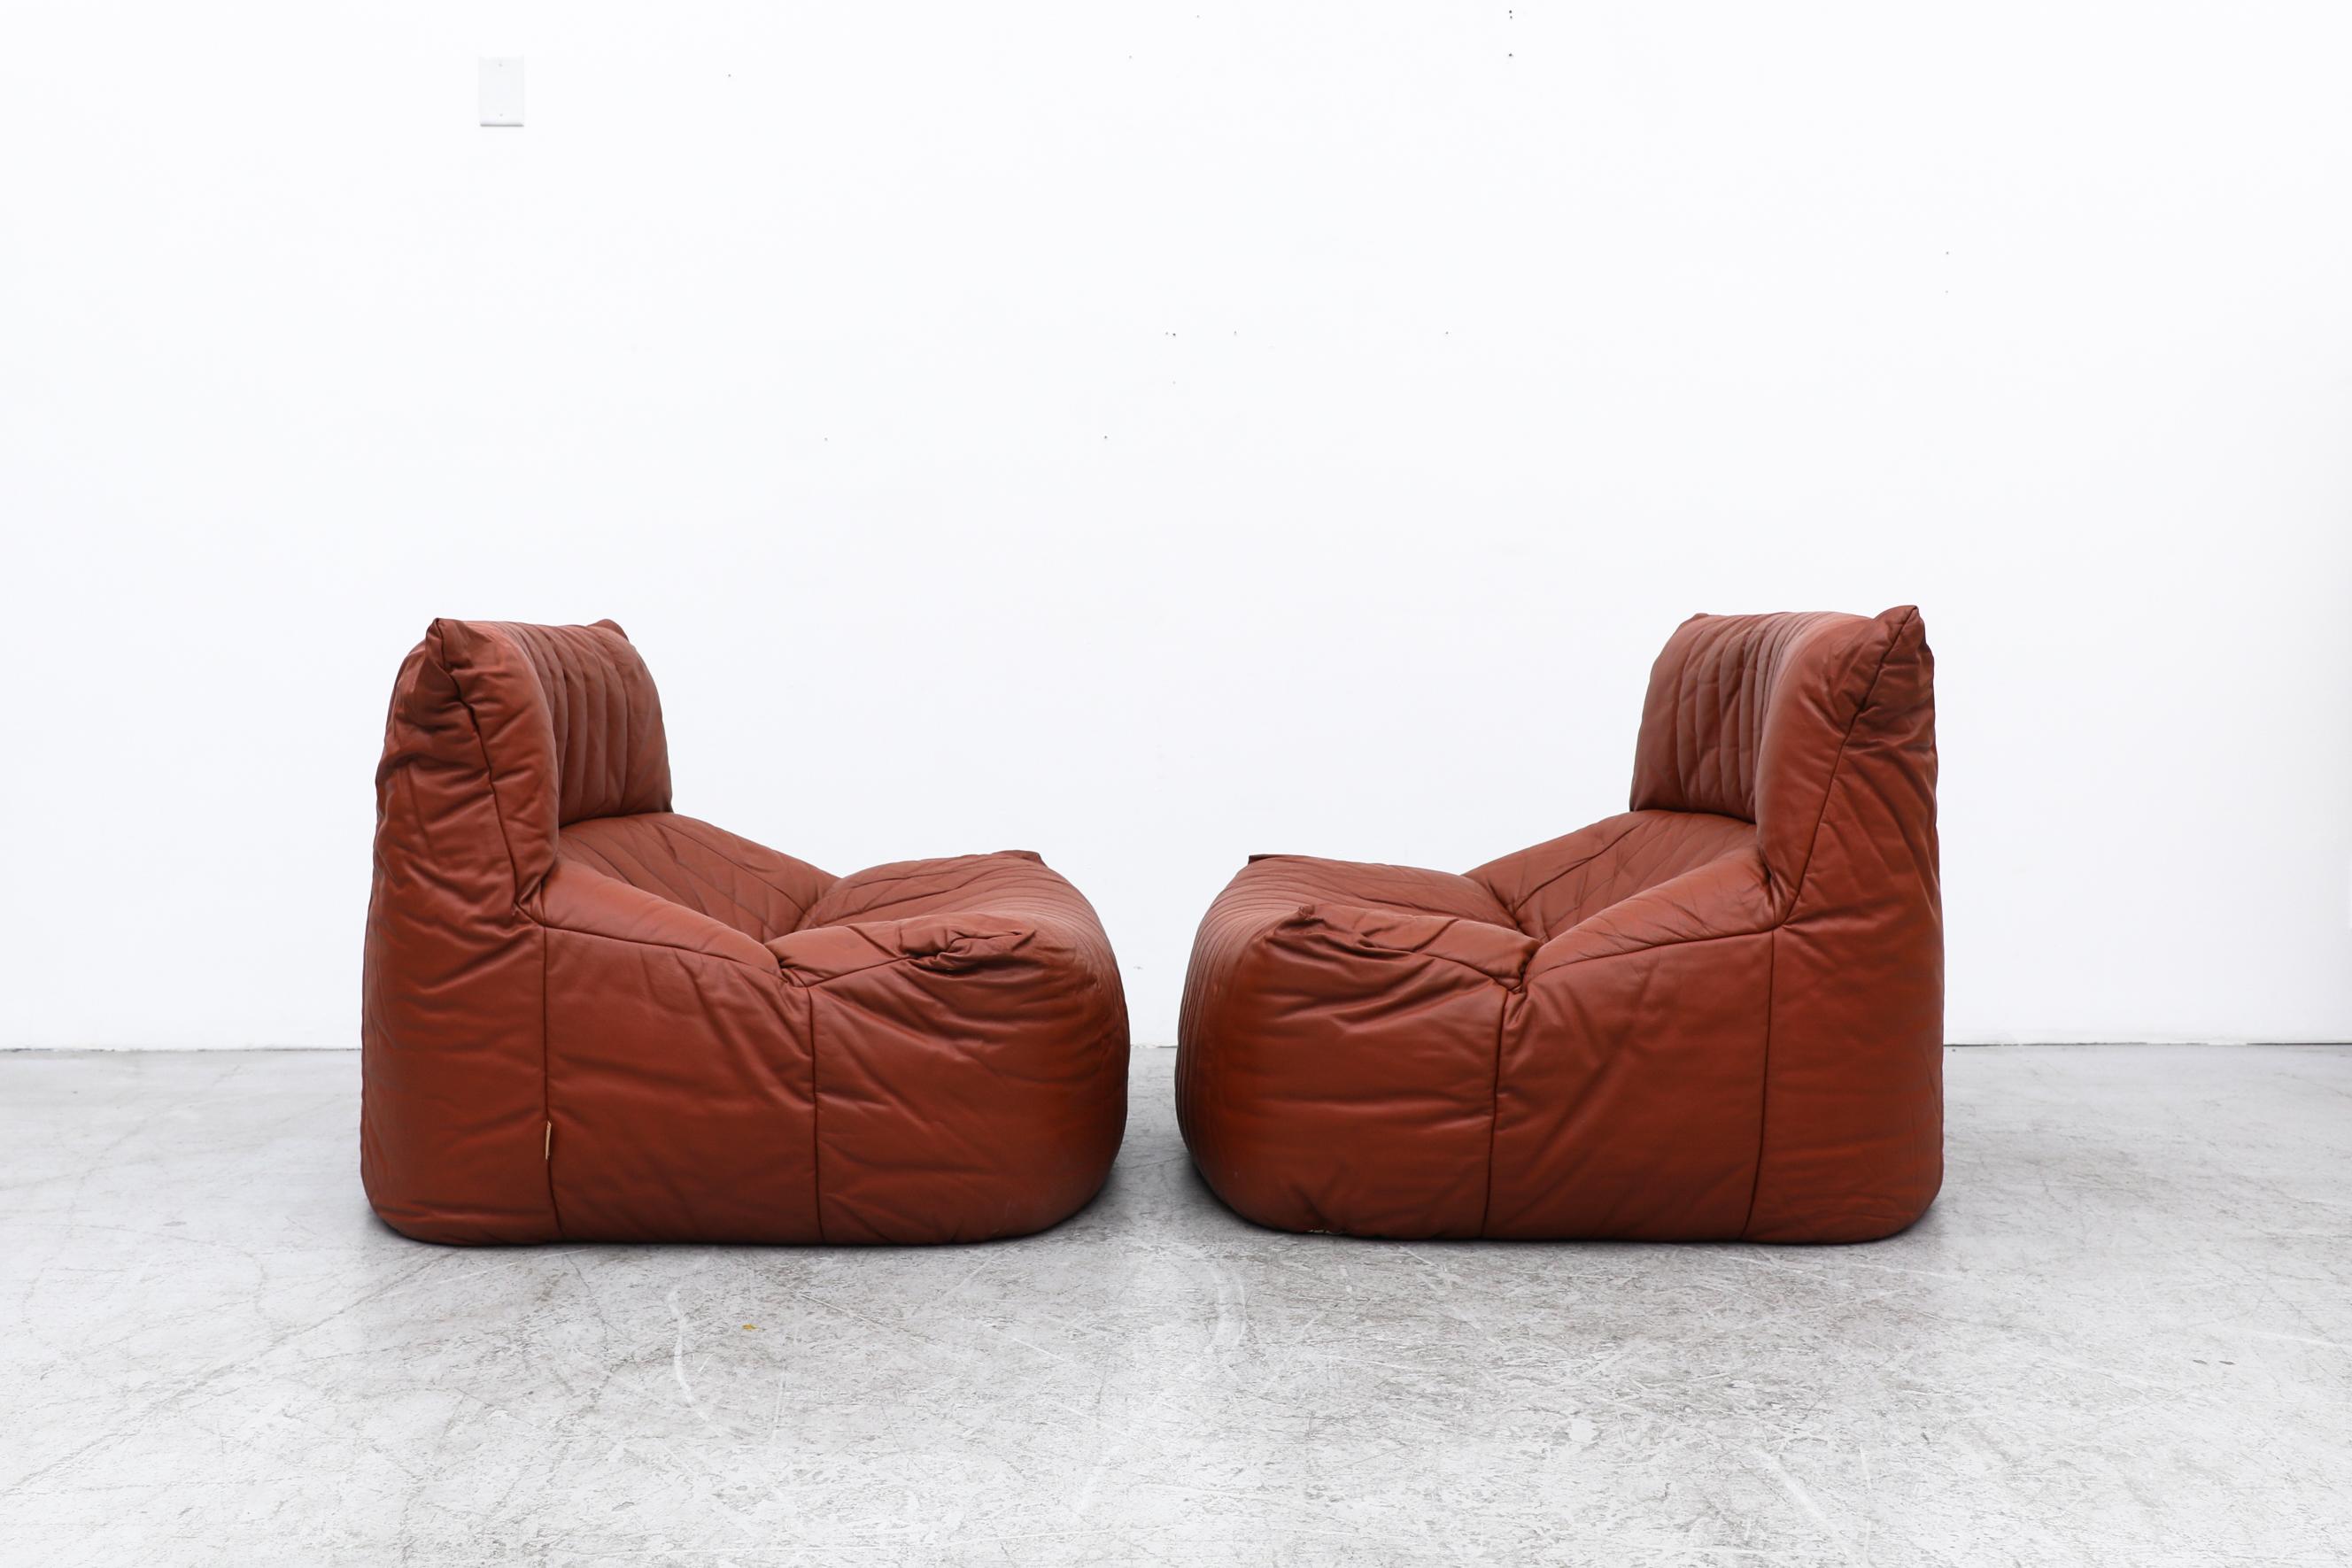 Pair of Ligne Roset 'Aralia' lounge chairs by Michel Ducaroy (1925-2009) whose most famous work, the iconic Togo Sofa, marked a highpoint in his career at Ligne Roset. These follow in Togo's footsteps with a foundation-less structure that provide